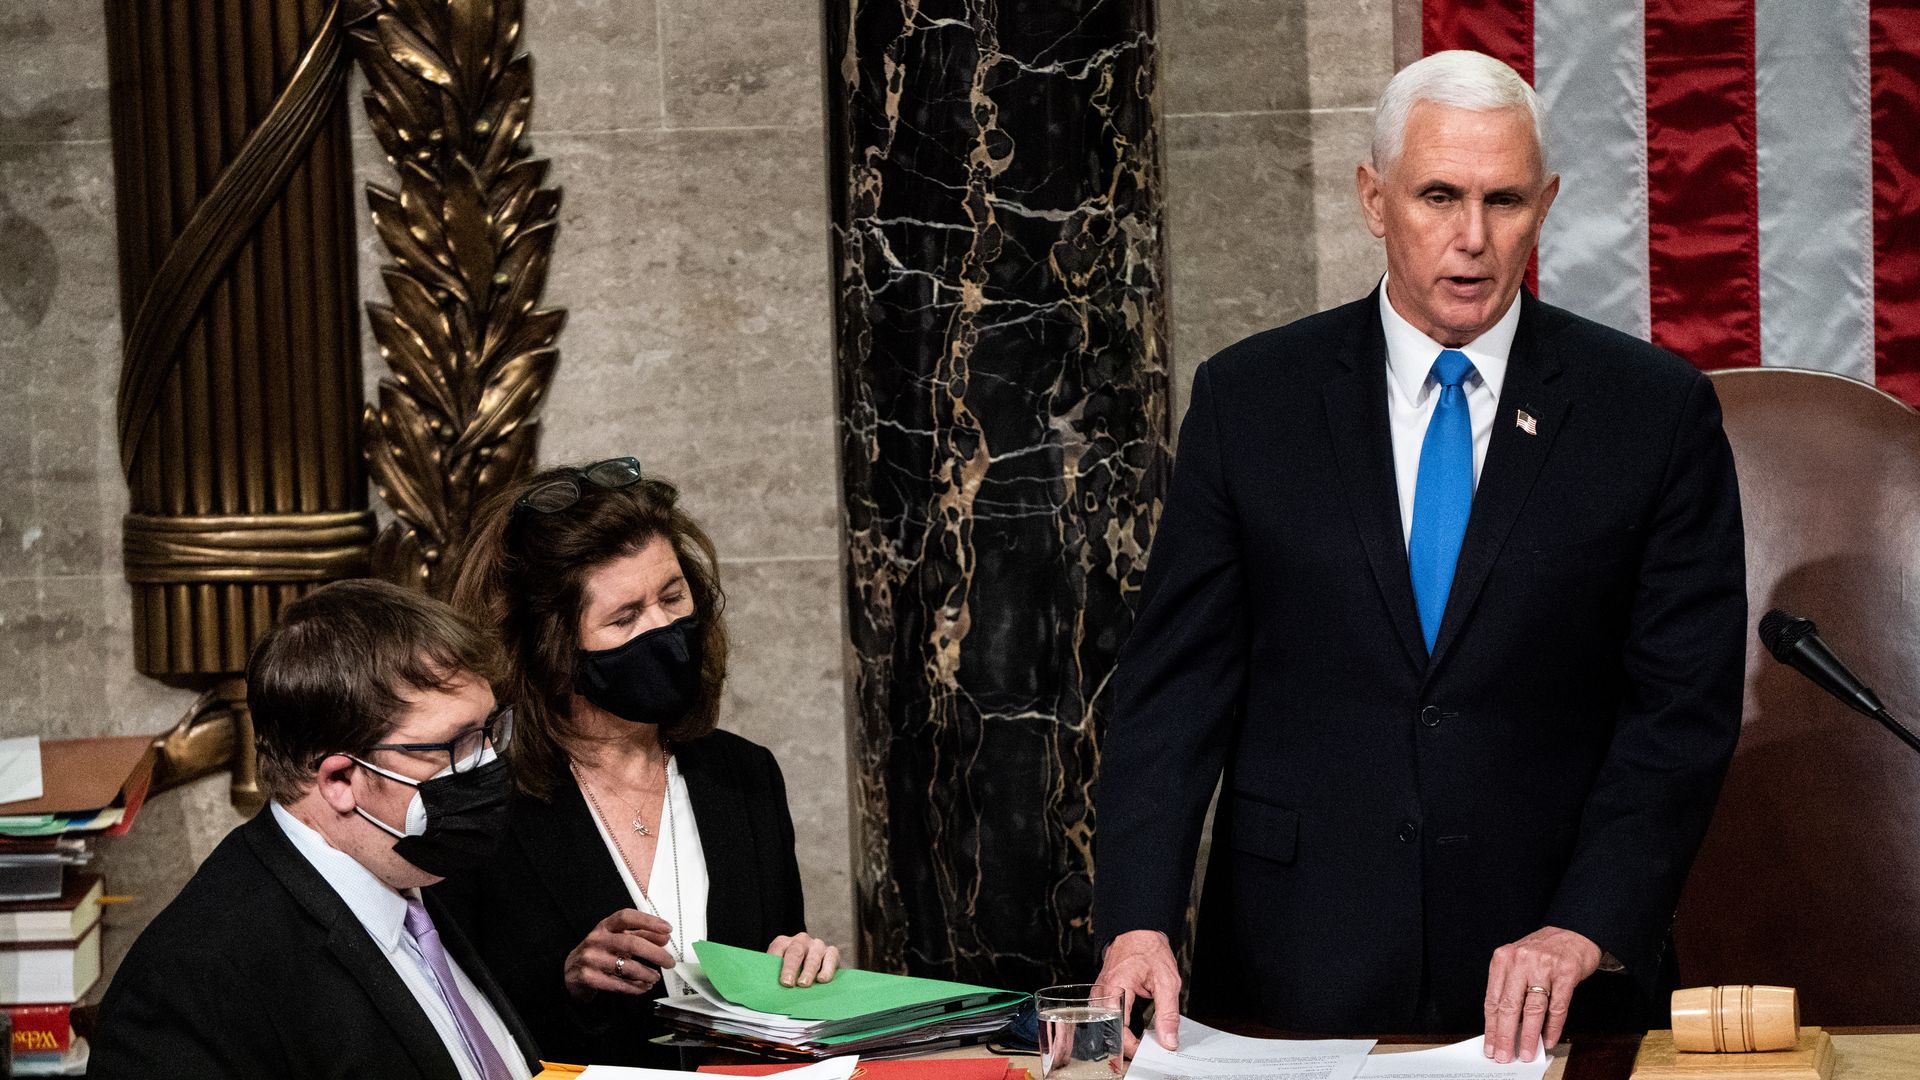 Pence presiding over joint session of Congress